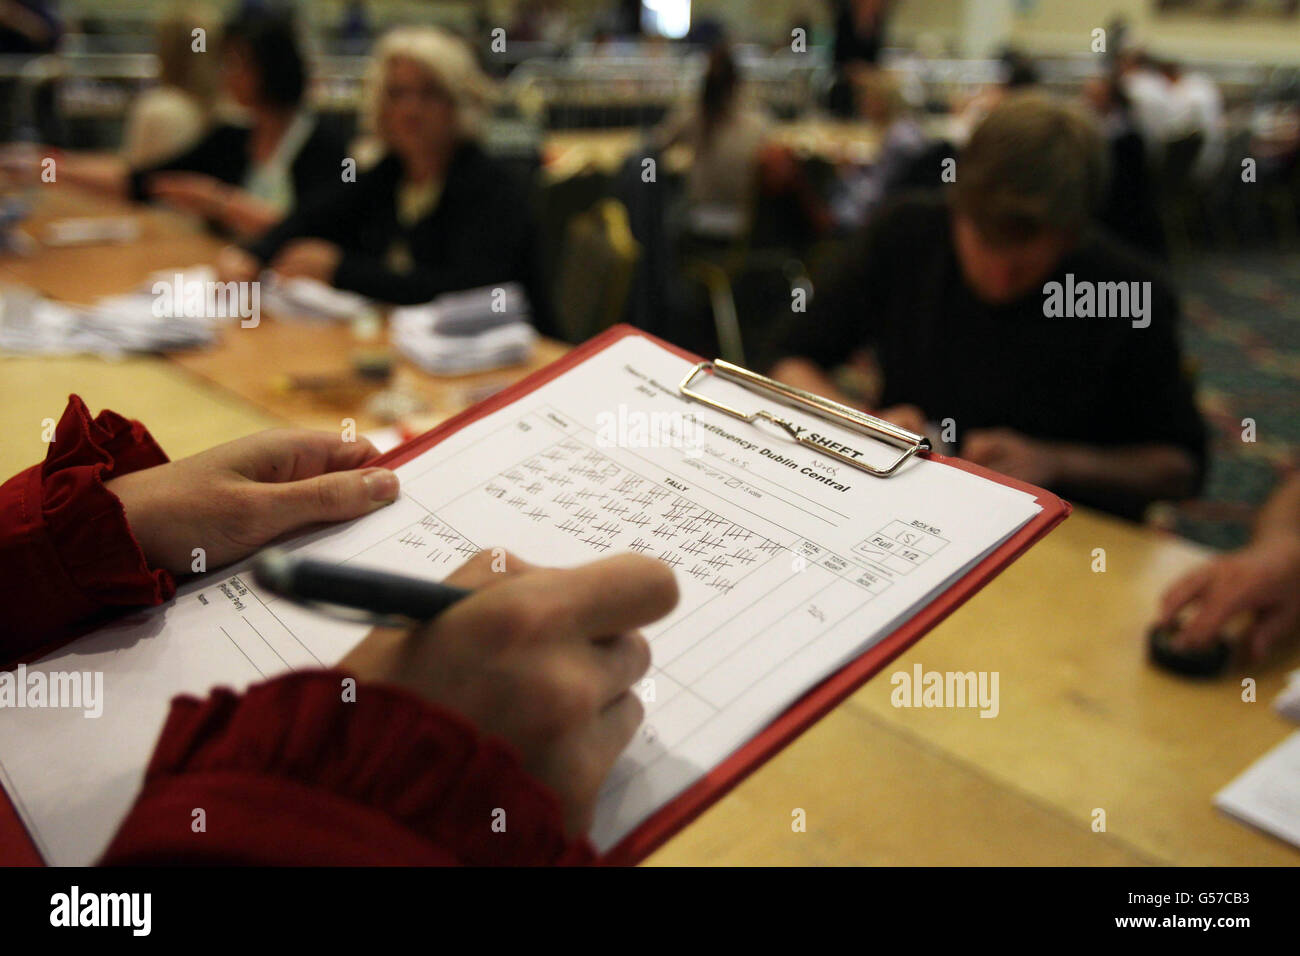 Counting begins in the European Fiscal Treaty Referendum at the Citywest Hotel in Dublin. Stock Photo